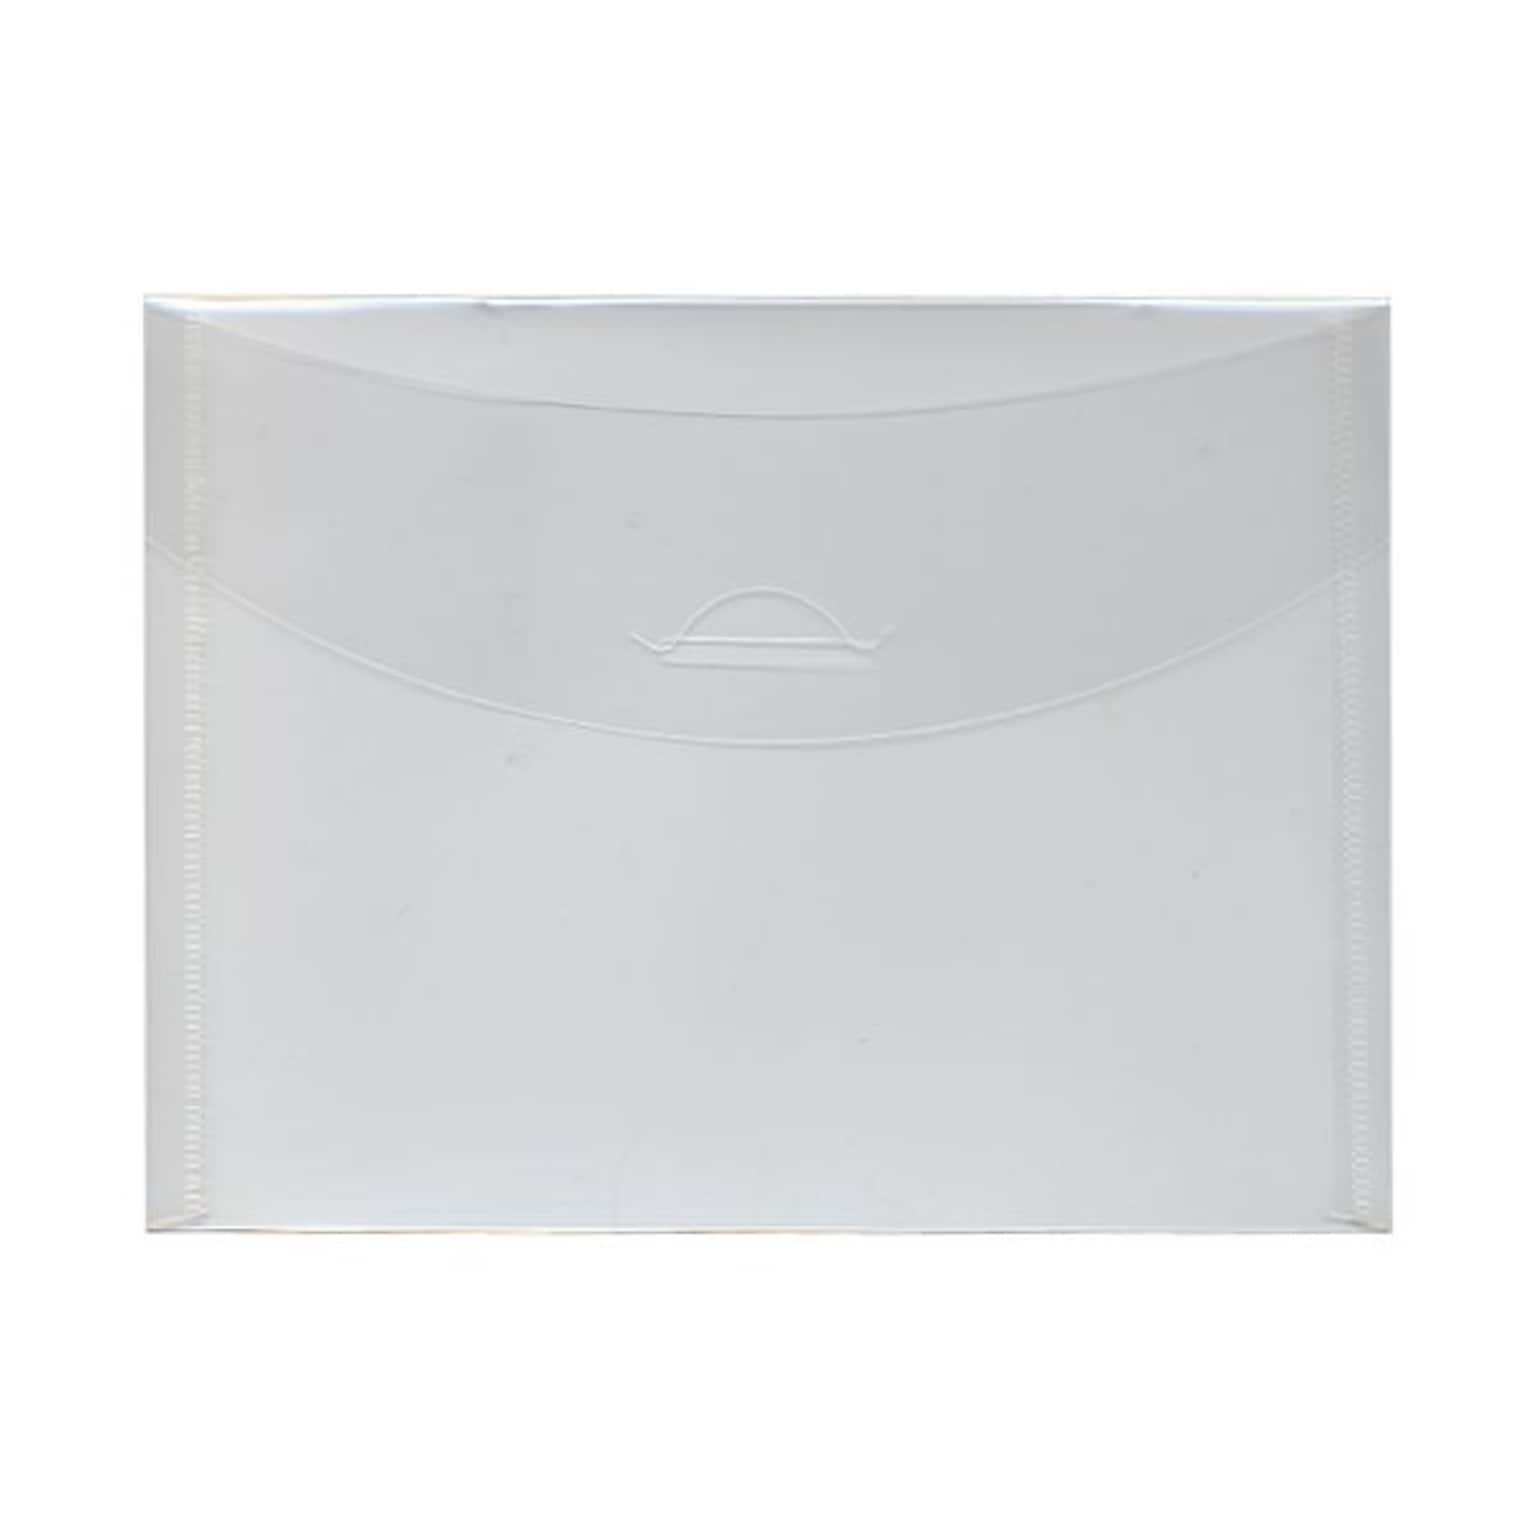 JAM Paper® Plastic Envelopes with Tuck Flap Closure, Booklet, 5 1/2 x 7 3/8, Clear Poly, 12/Pack (1541743)